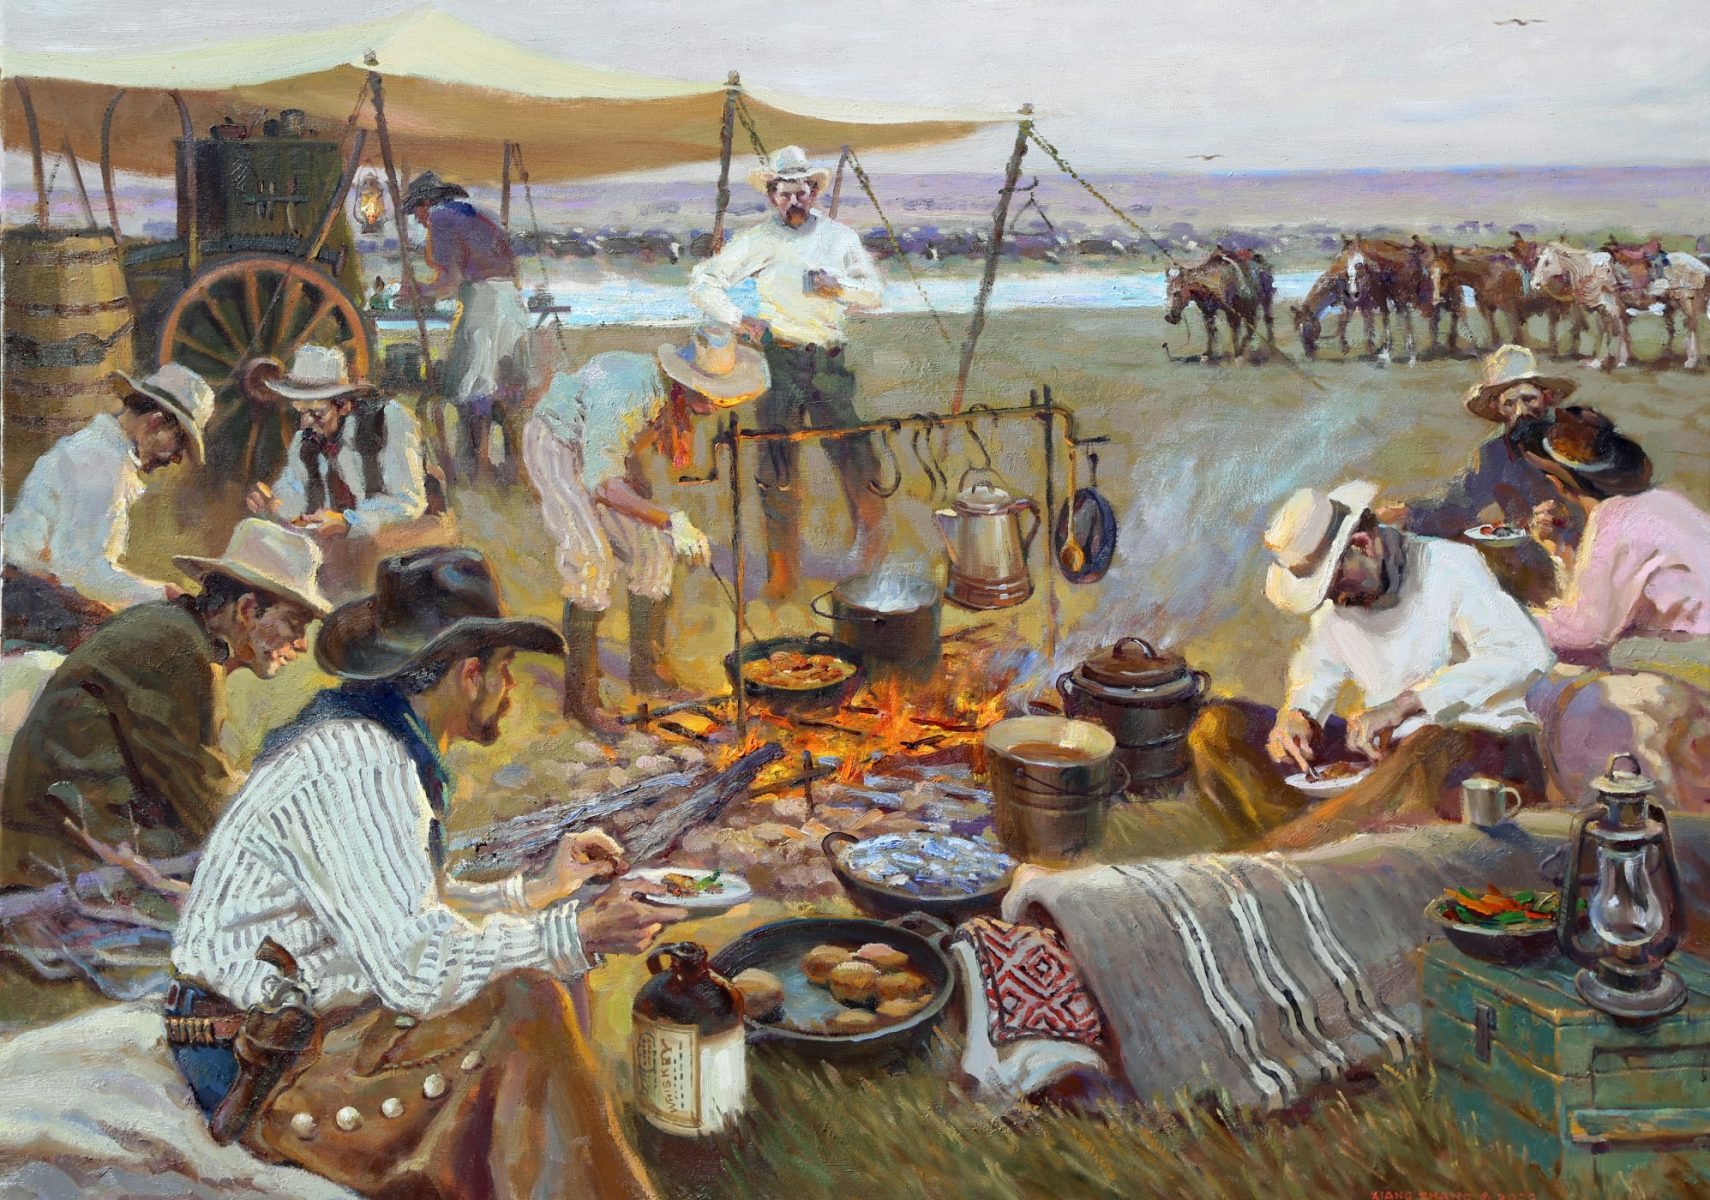 Western impressionist painting of settler's feast by Xiang Zhang